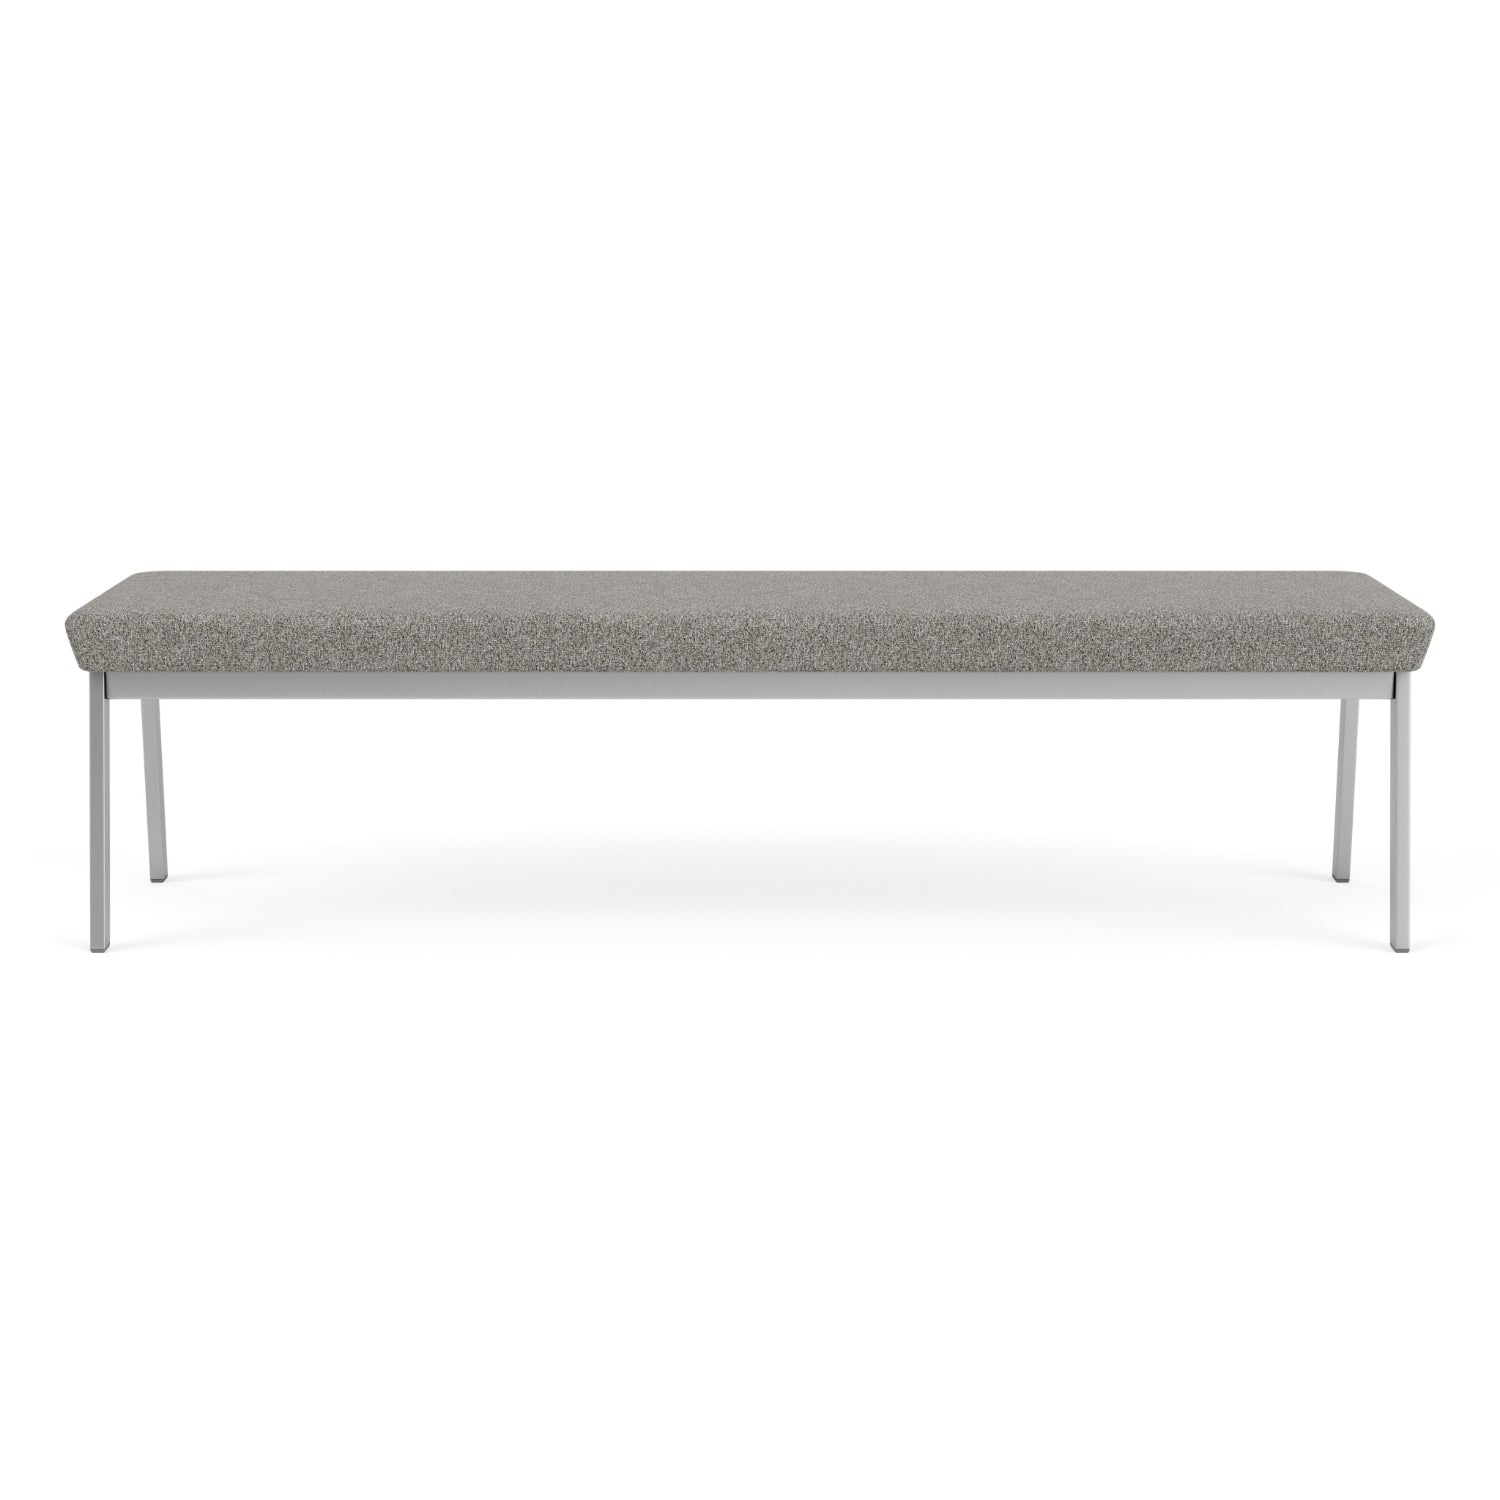 Newport Collection Reception Seating, 3 Seat Bench, Standard Fabric Upholstery, FREE SHIPPING